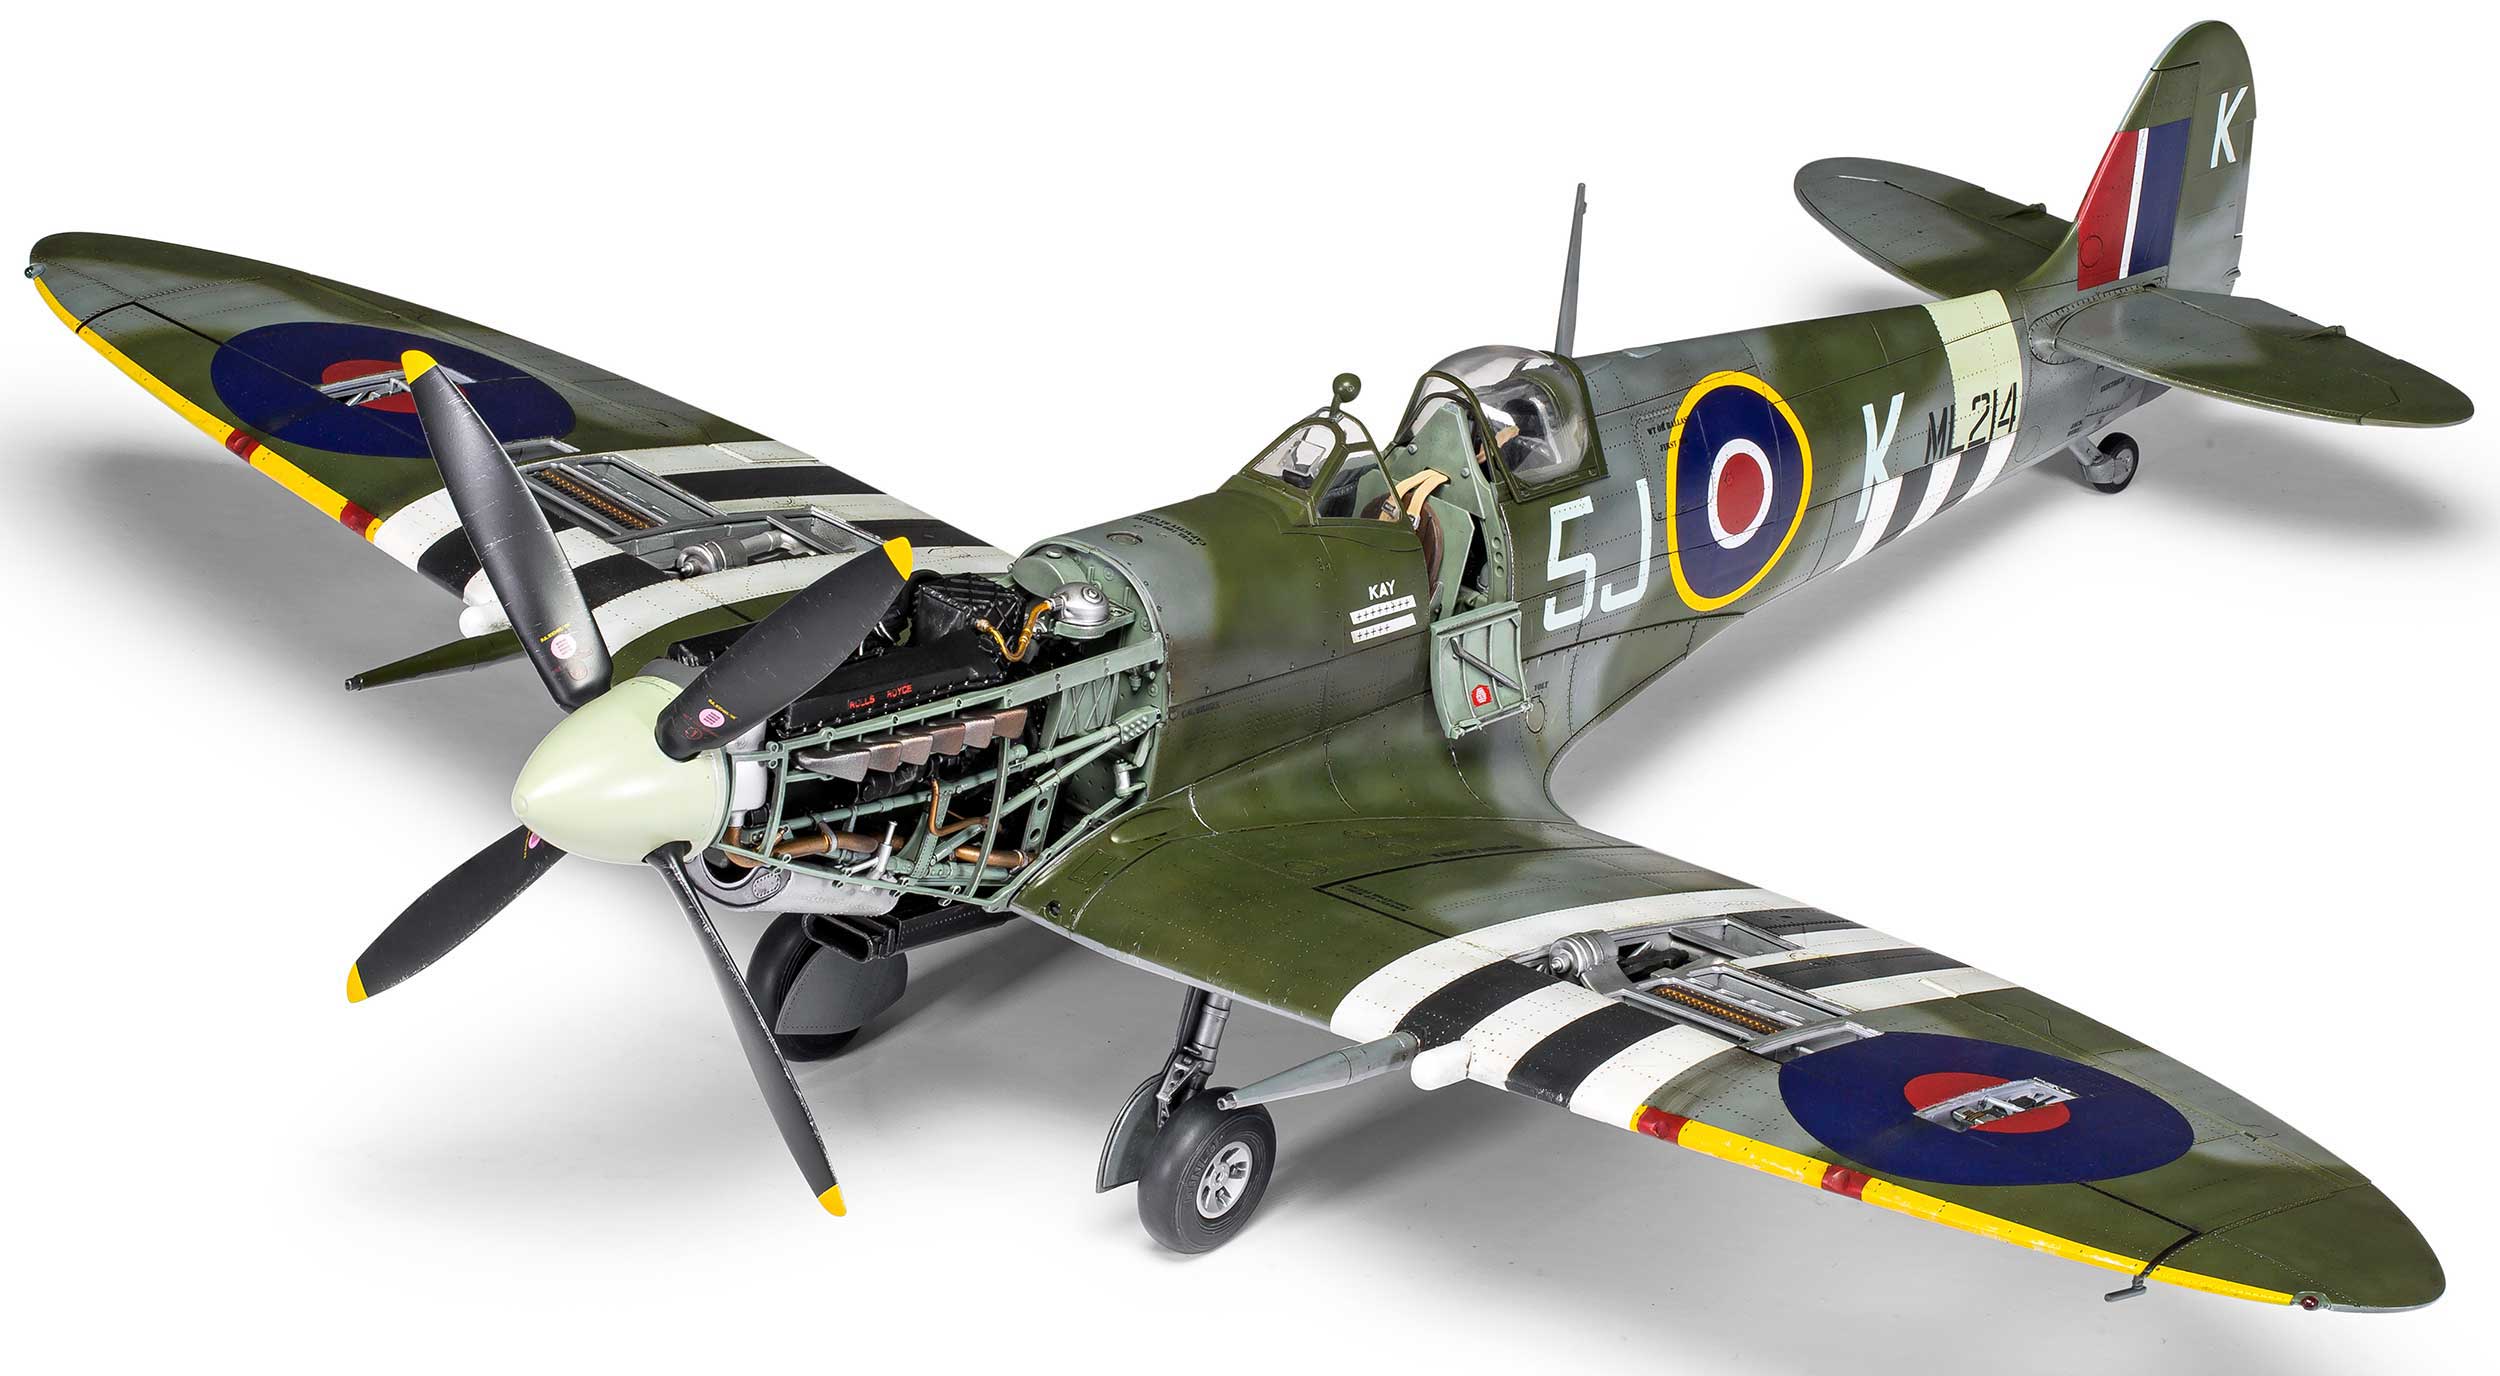 Spitfire goes back into production! Well, OK, the Airfix kit